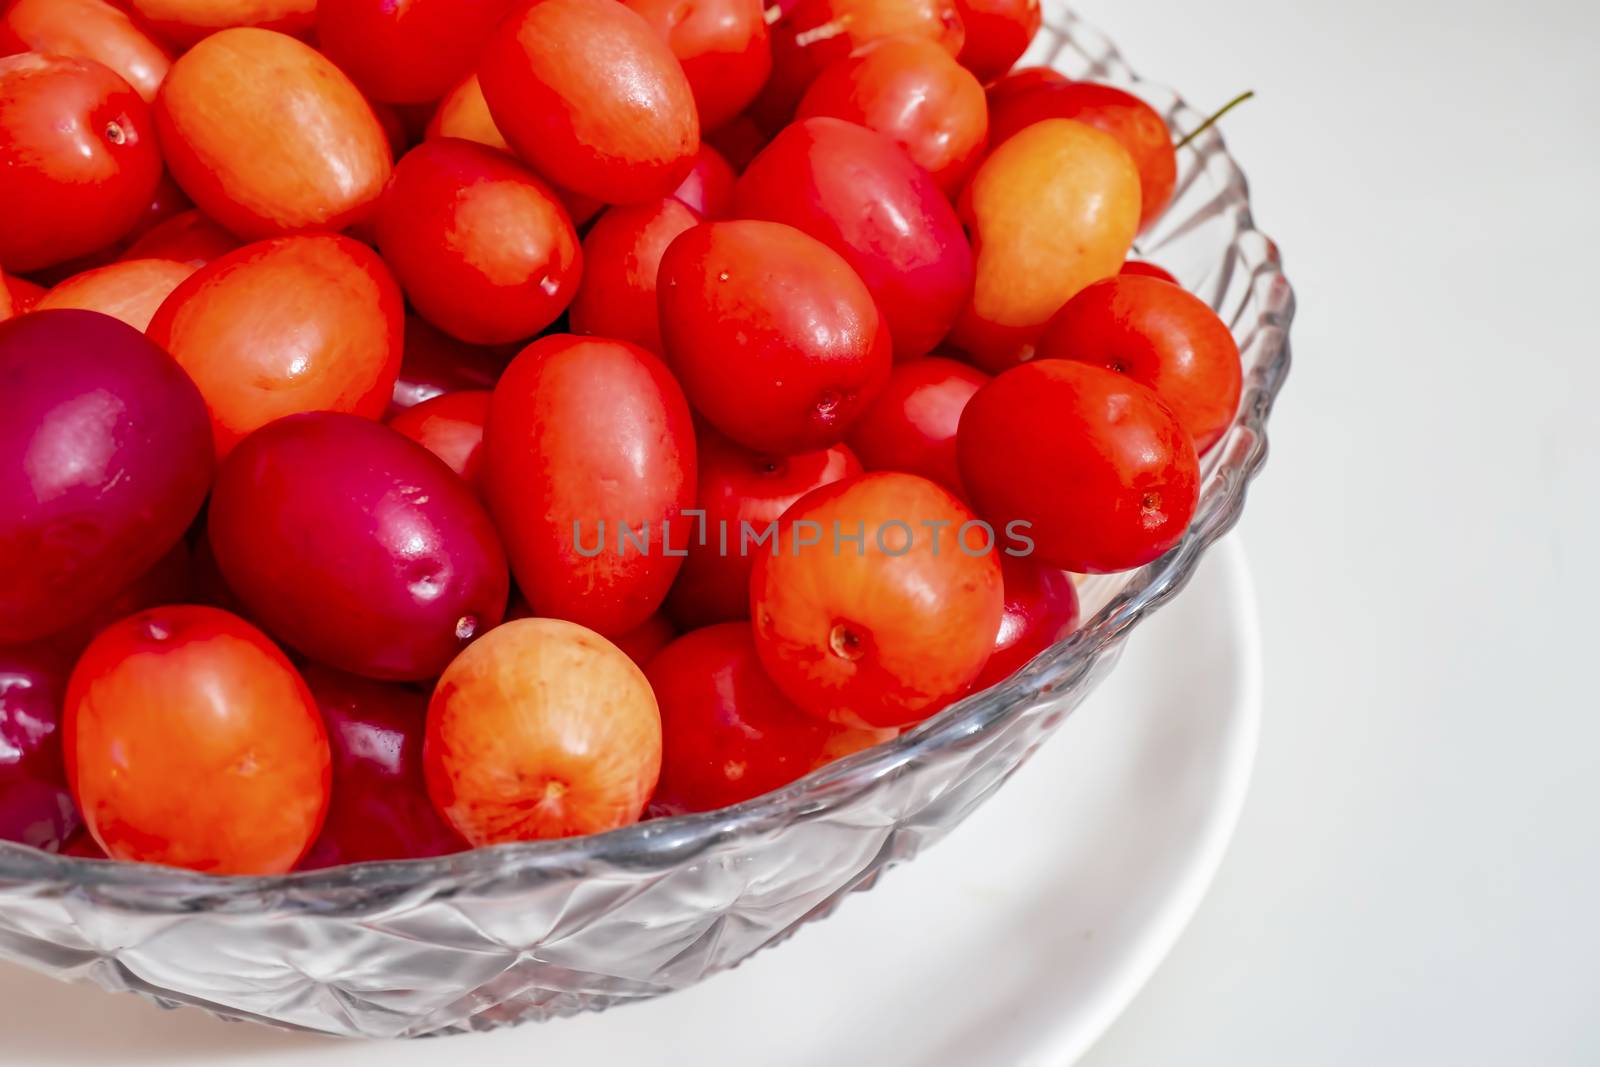 cranberry fruits in decorative plate